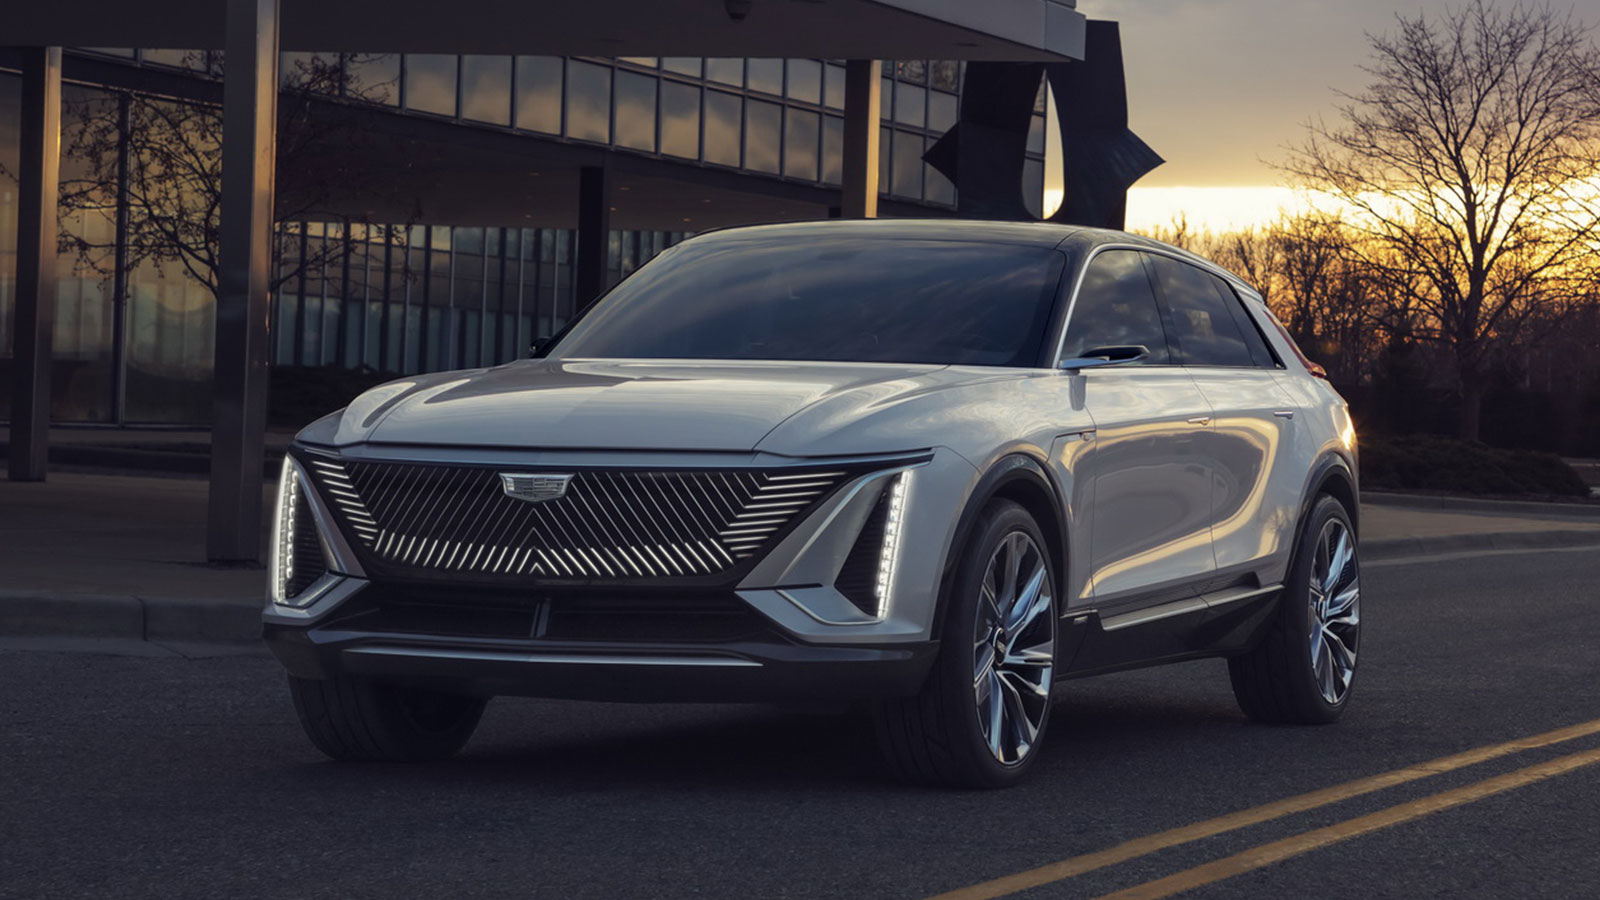 Cadillac Gives Us A Preview Of The Lyriq, Its First Electric Luxury SUV